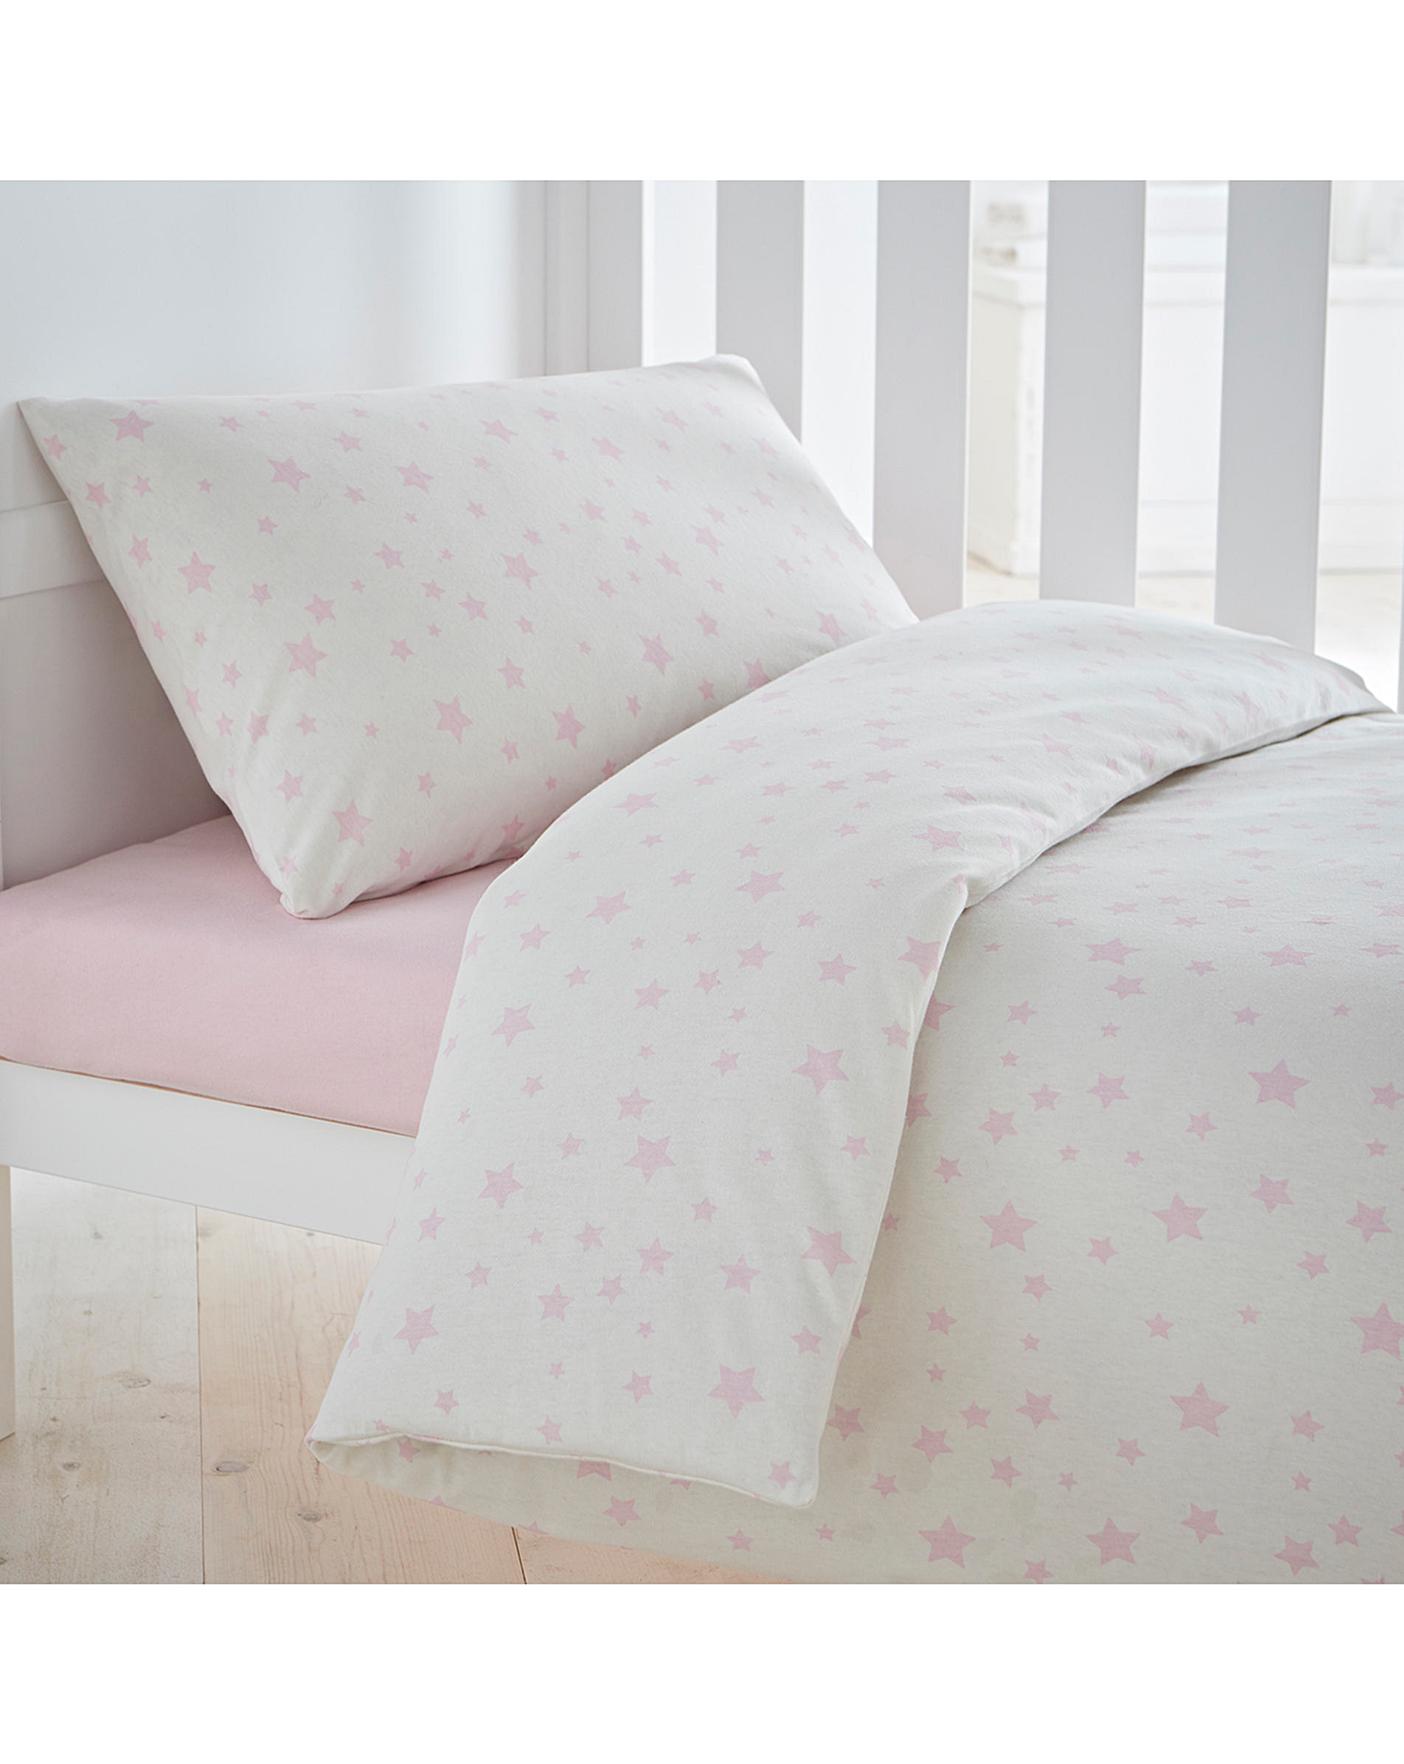 Printed Stars Cot Bed Duvet Cover Fashion World